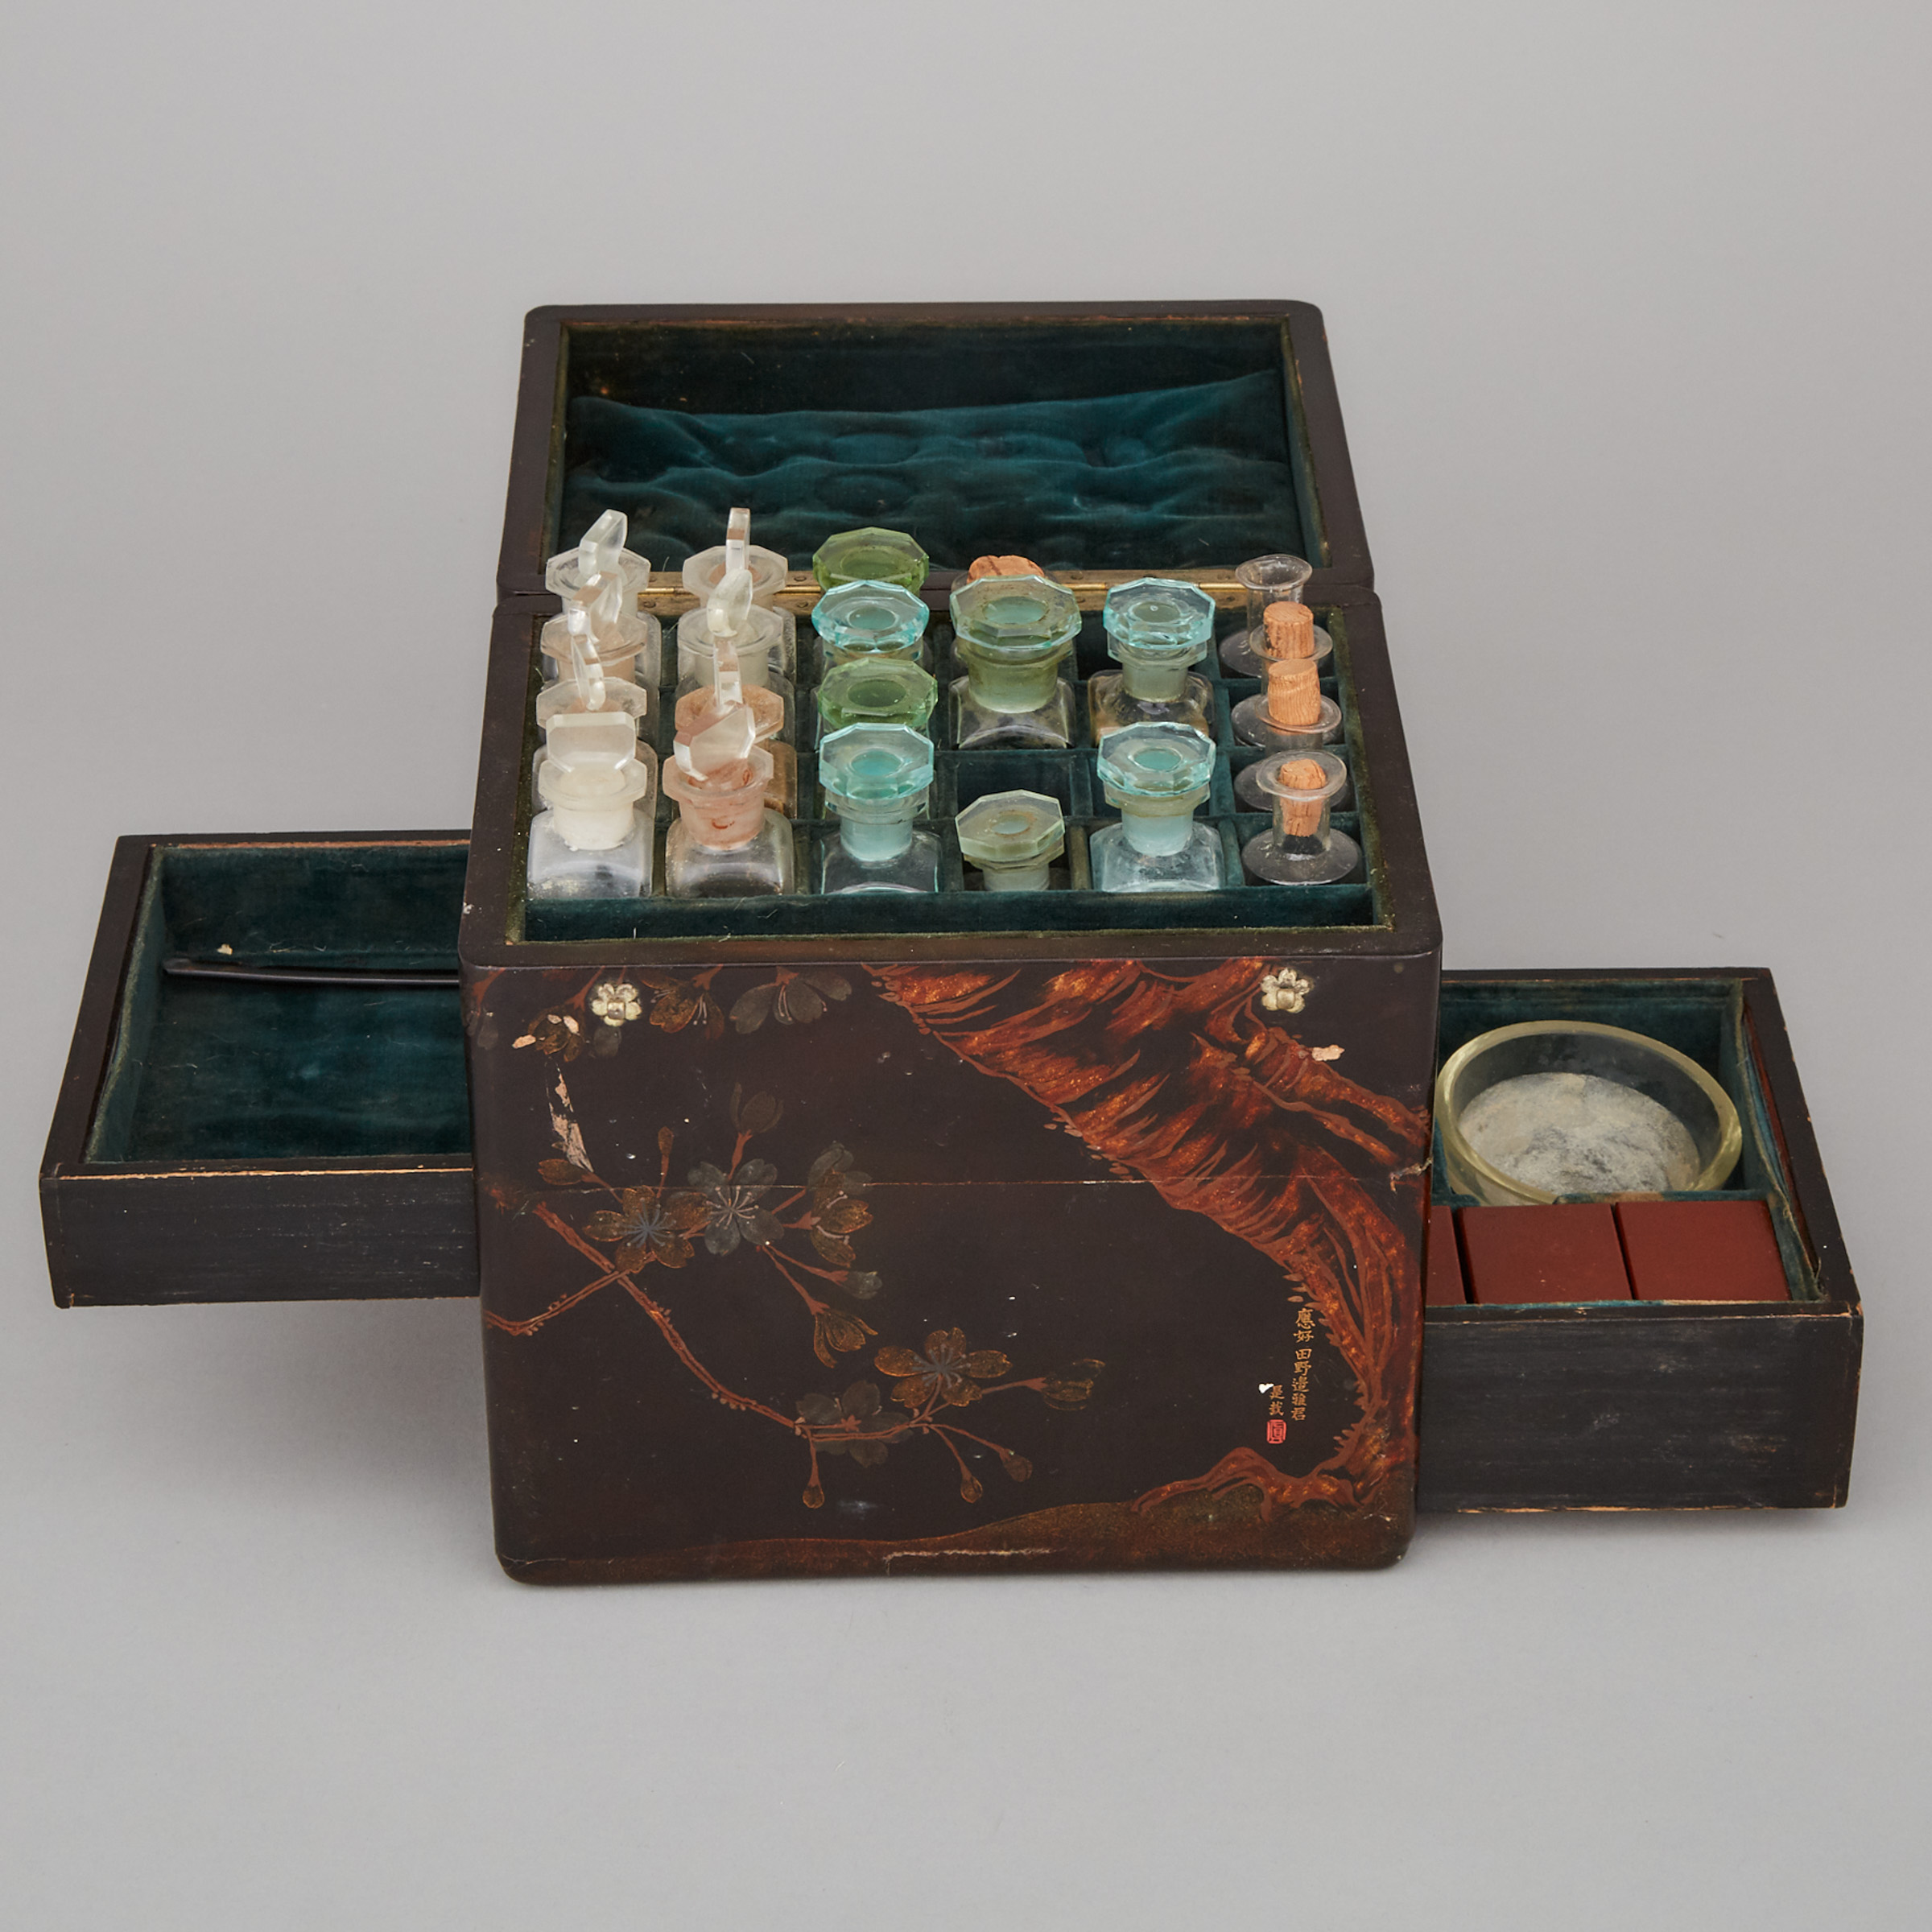 Japanese Lacquer Apothecary Case, 19th century